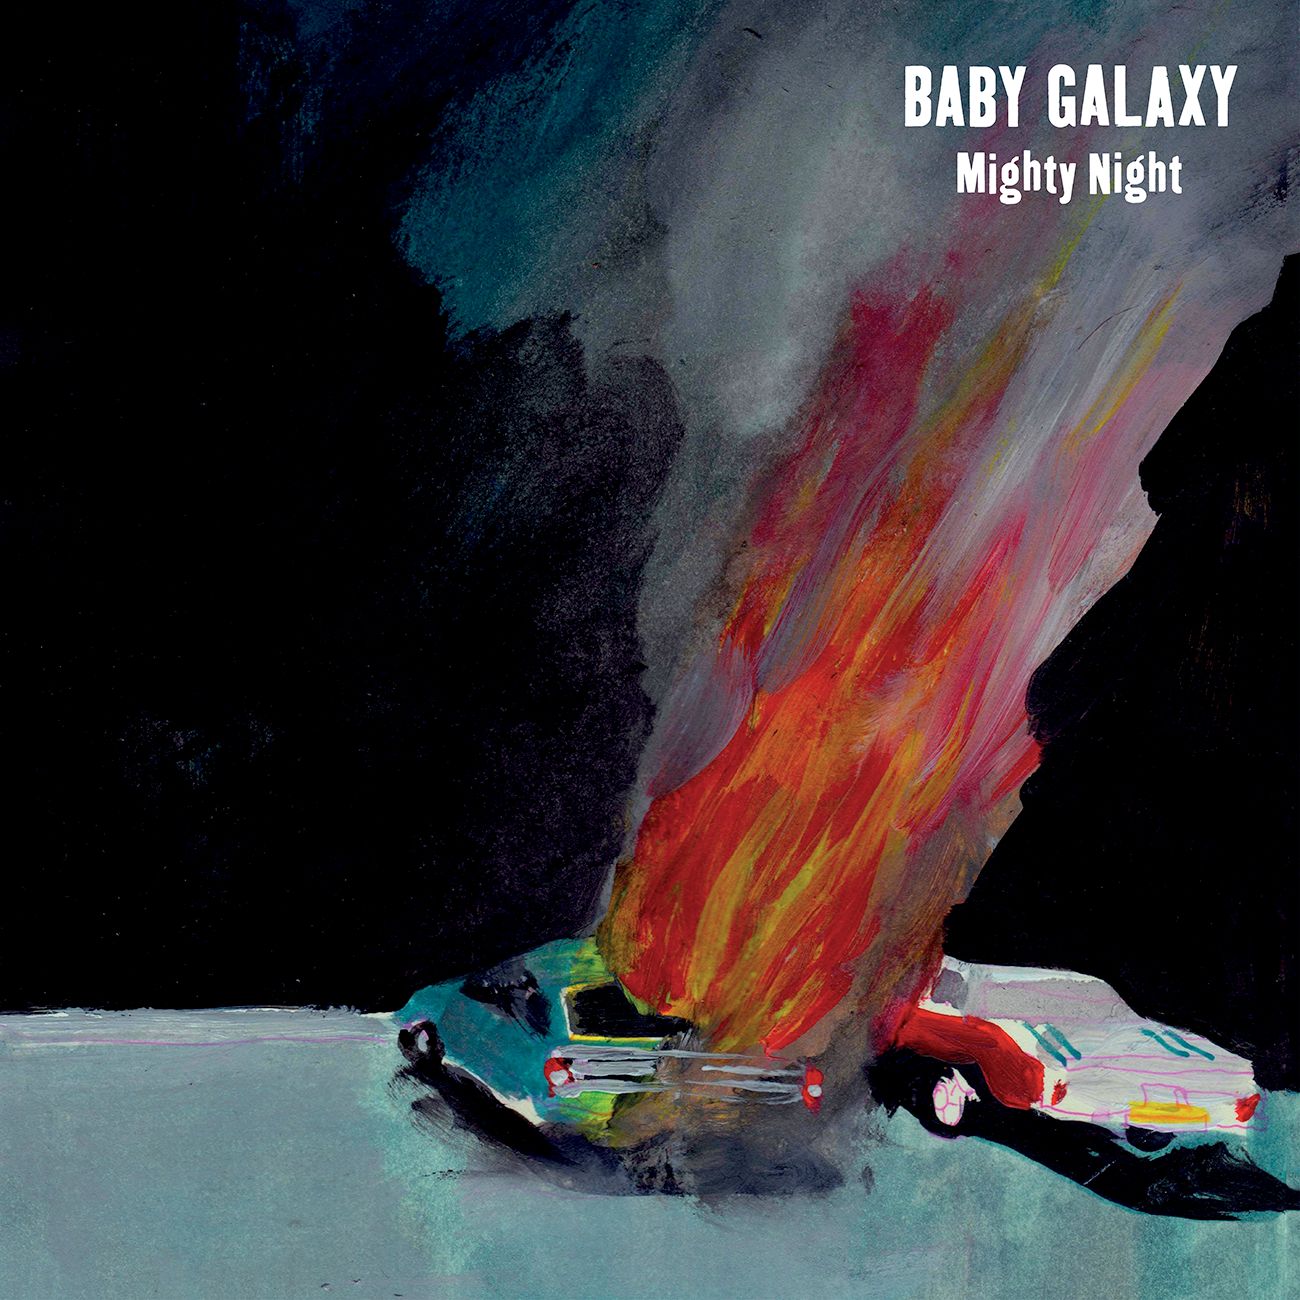 Baby Galaxy – “New Flavors”